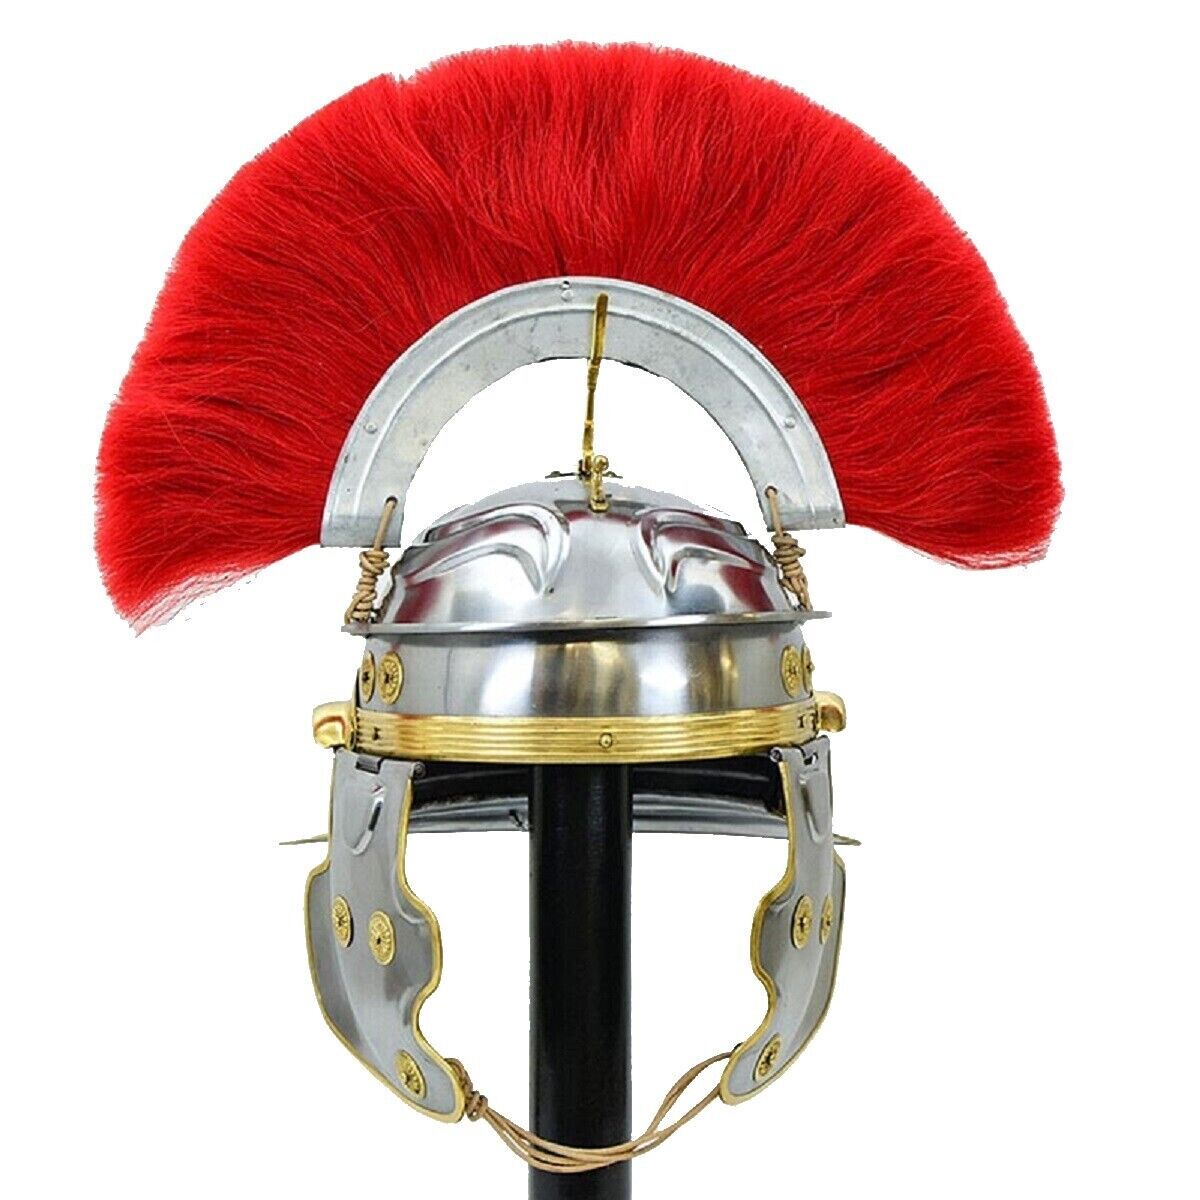 New Roman Imperial Gallic Centurion Helmet Armour Red Crest Plume with exp ship.